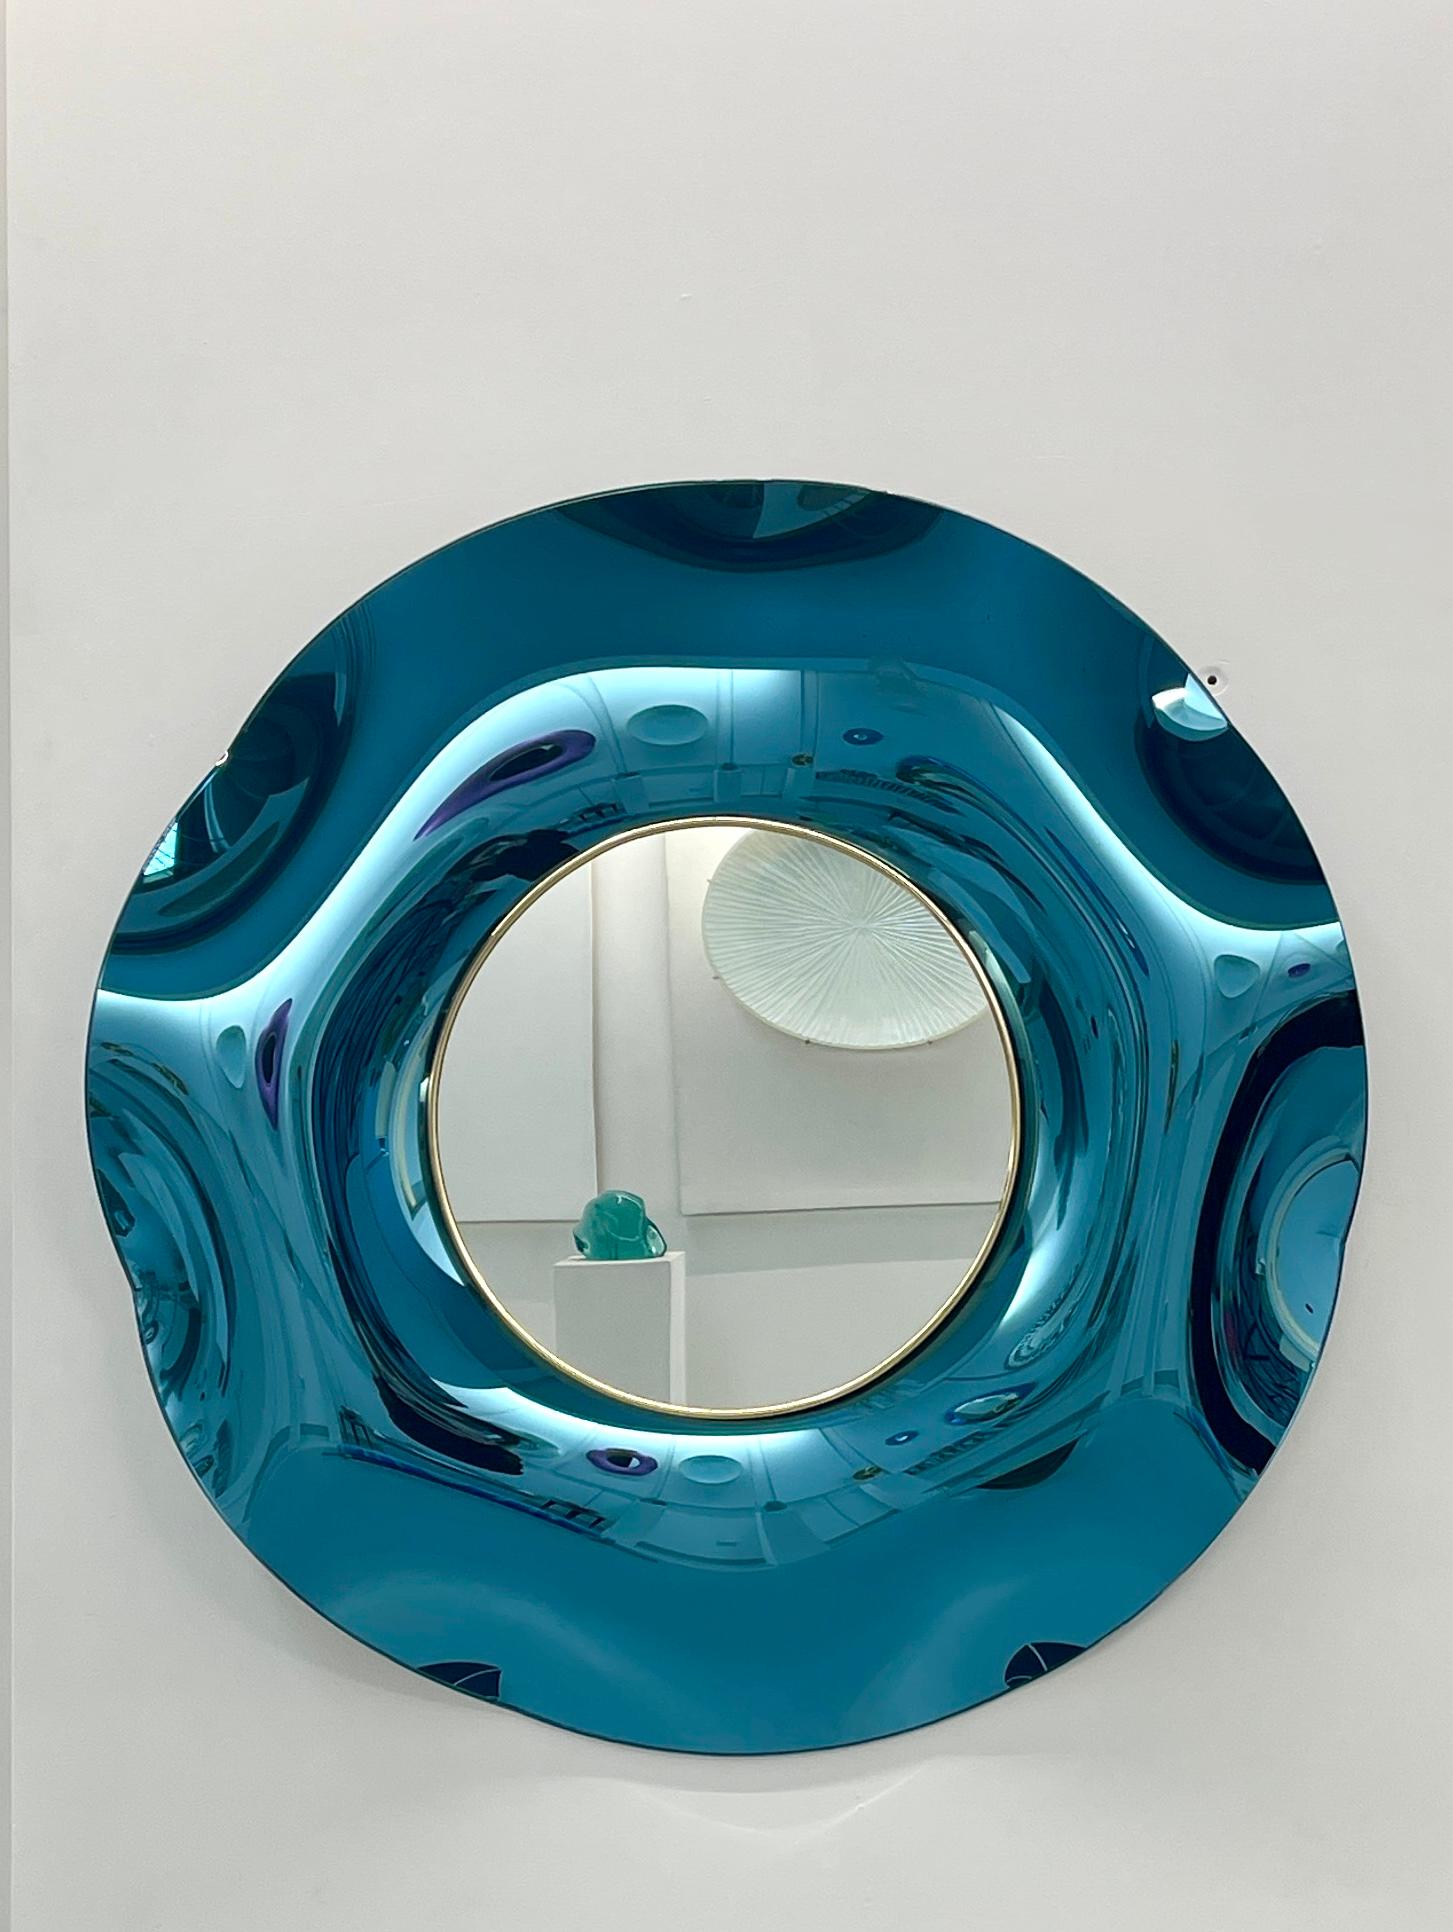 Hand-Crafted 'Undulate' Handmade Celestial Blue Crystal Mirror Dia.40'' by Ghiró Studio For Sale